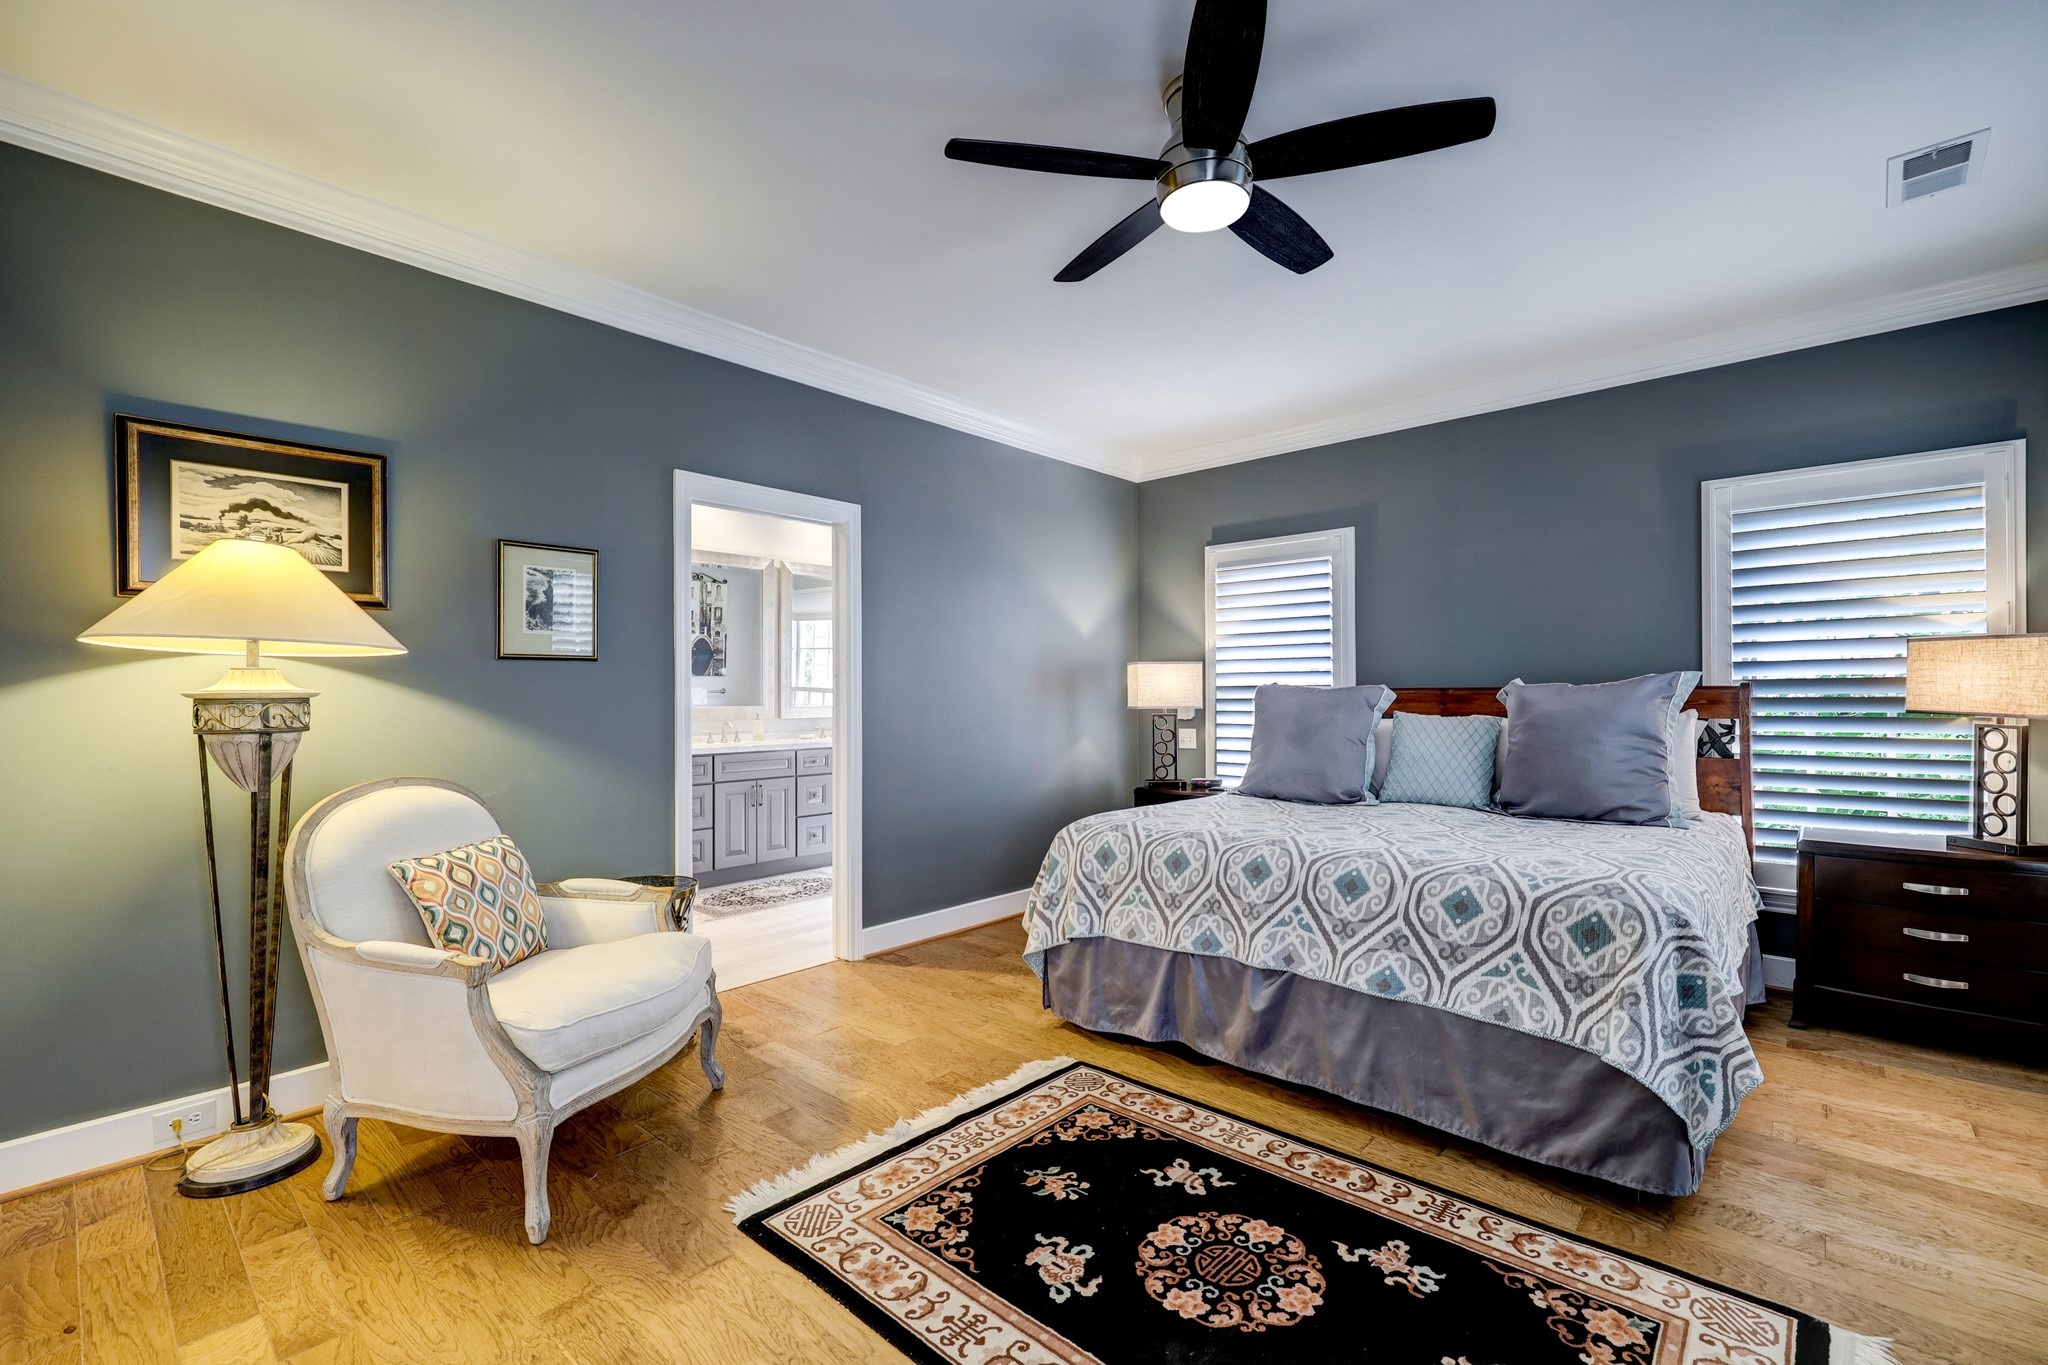 Large secondary bedroom with ceiling fan, hardwood floors and custom shutters. Through the doorway is the bath.